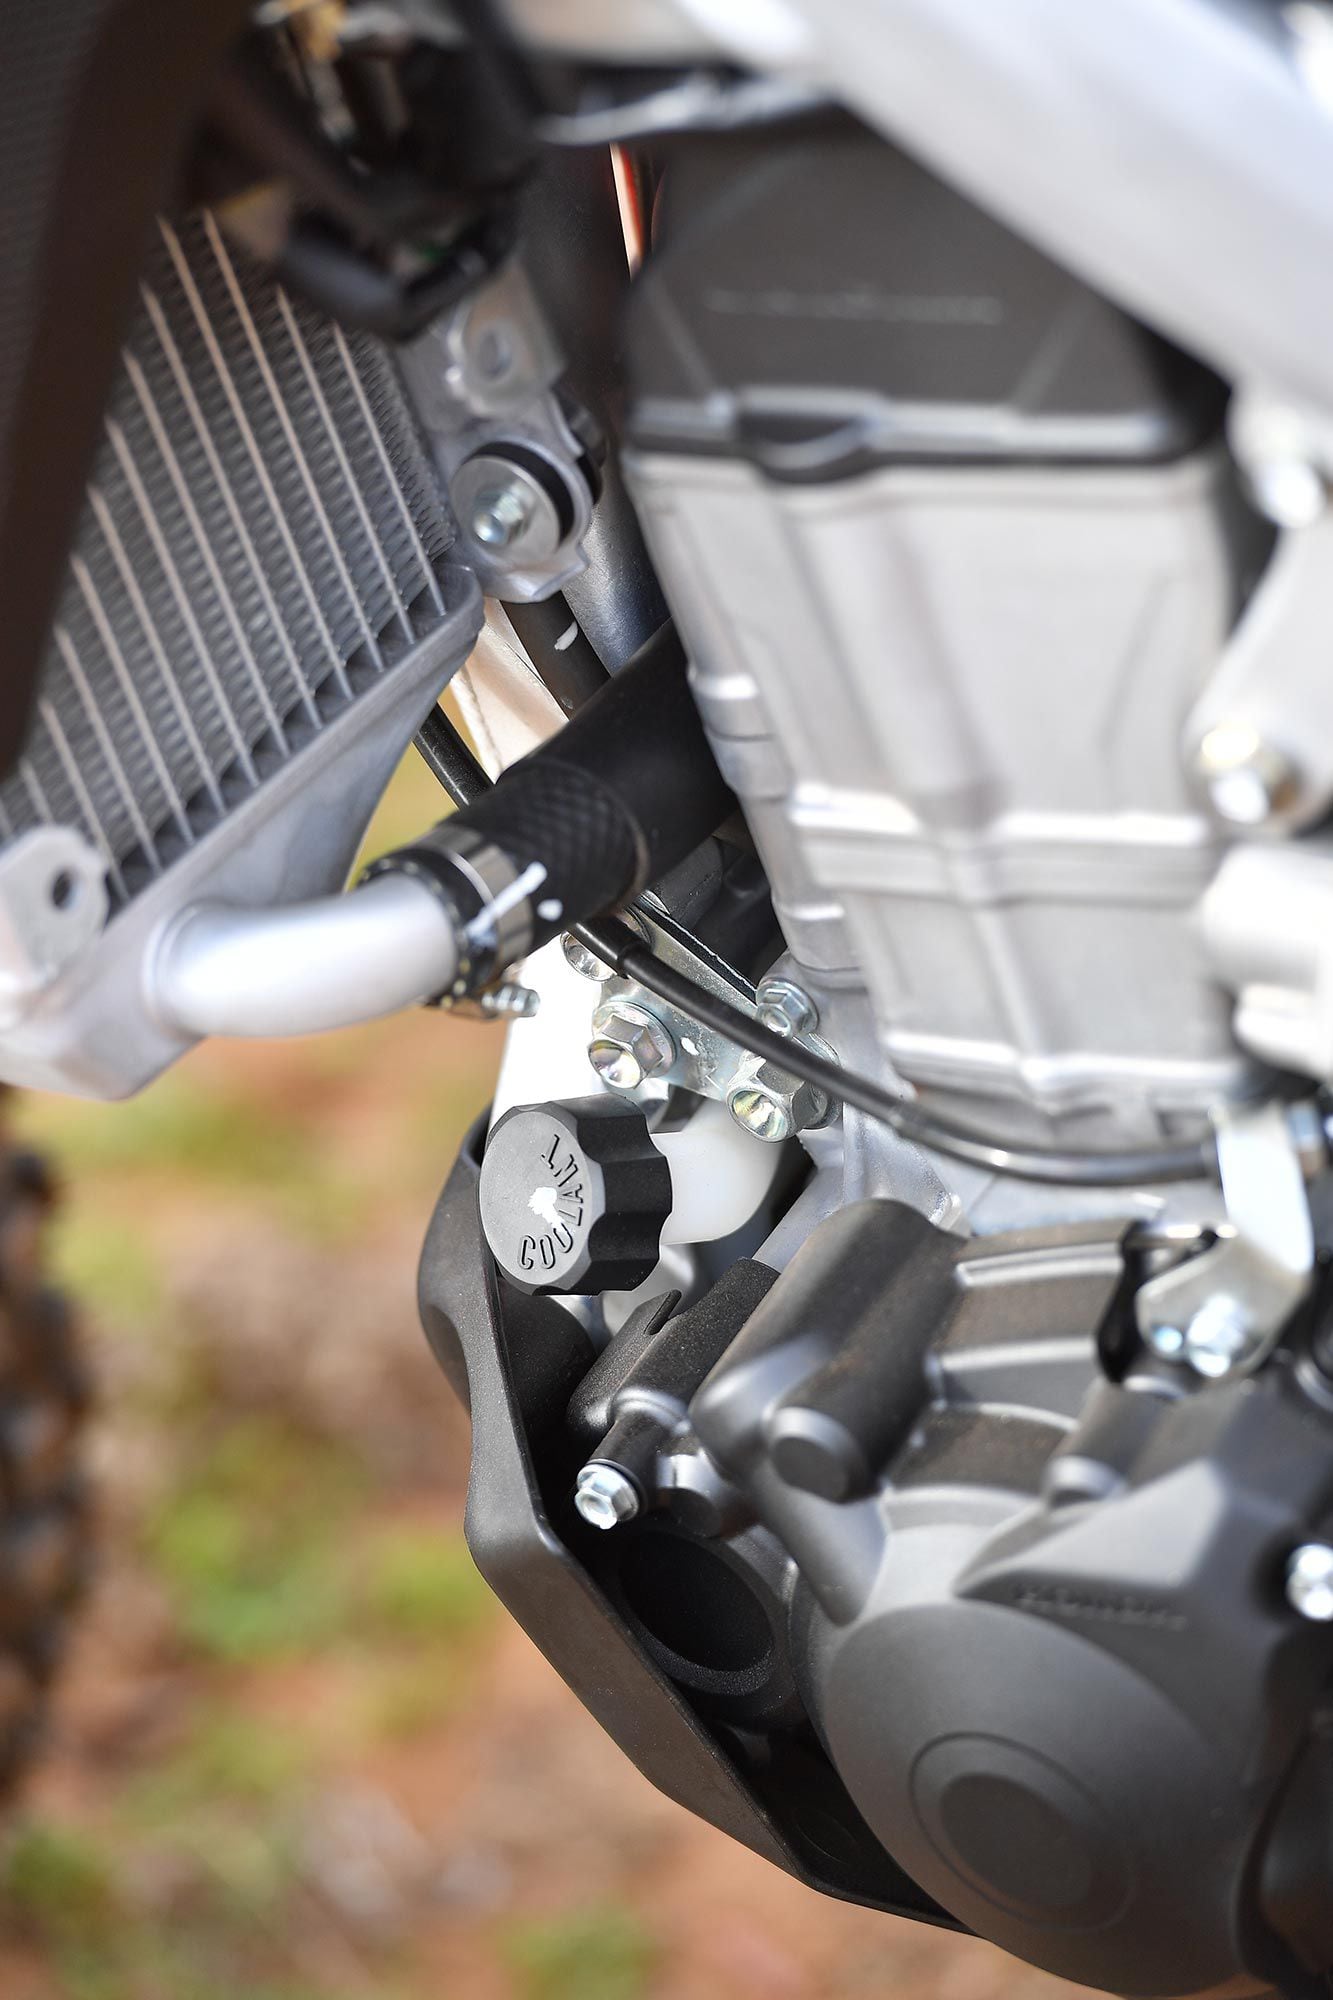 Radiator fluid overflow catch tank location is down low and well protected behind the full-coverage skid plate.